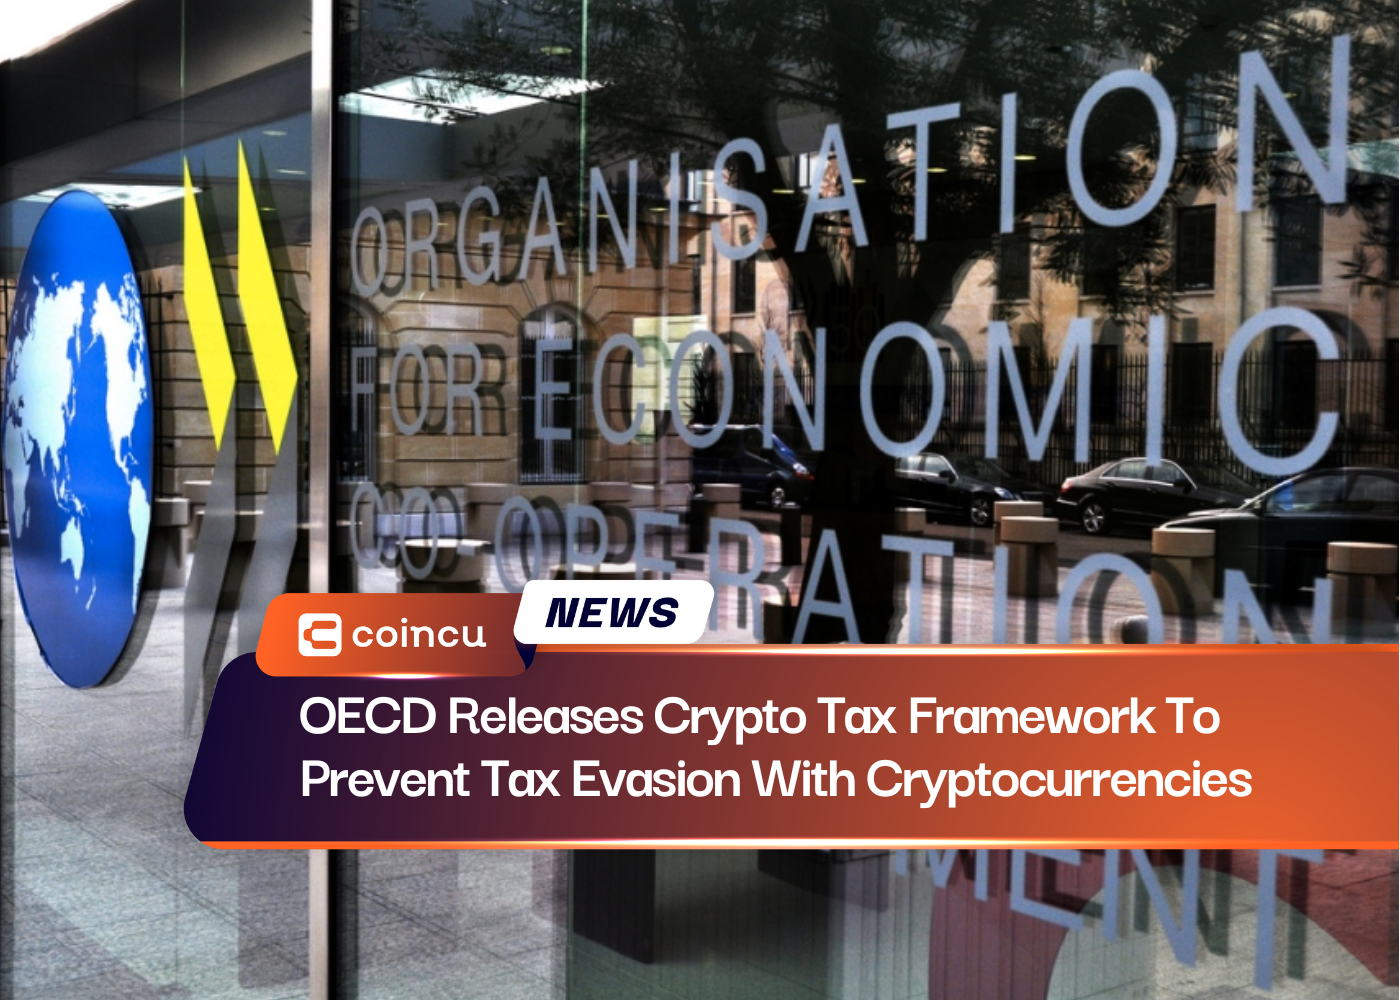 OECD Releases Crypto Tax Framework To Prevent Tax Evasion With Cryptocurrencies